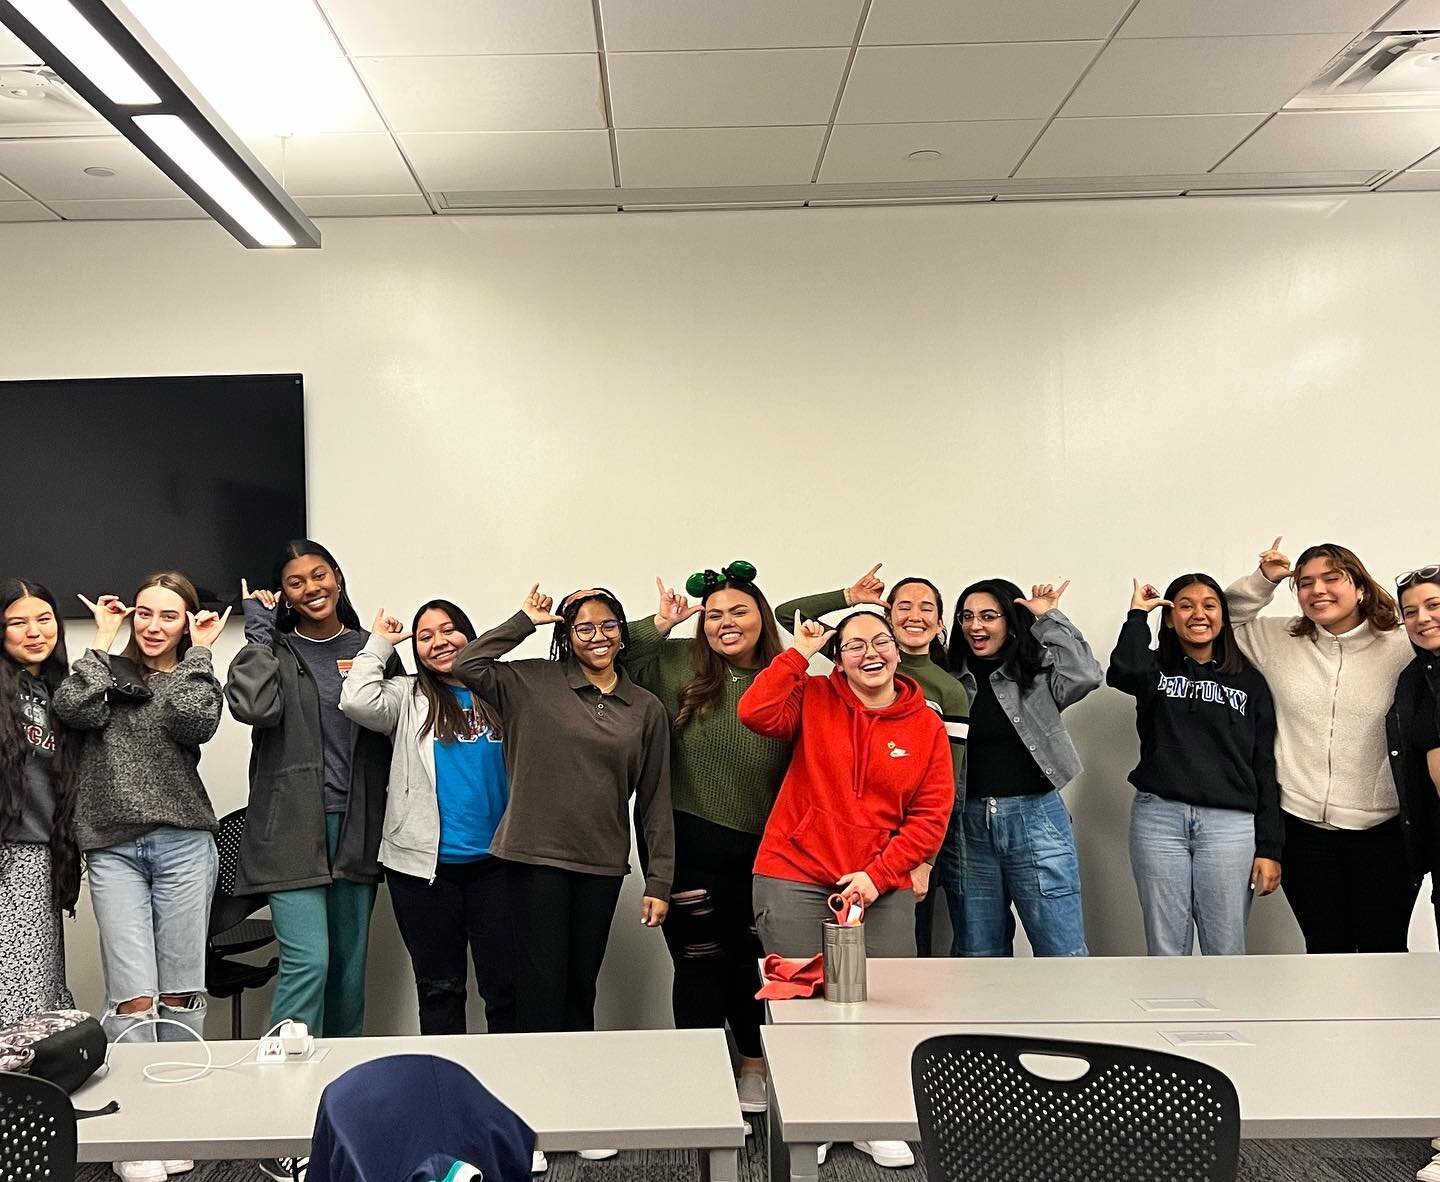 It was a pleasure to finally meet with Mentalla Ismail, the Executive Director of Refuge, at the high school and also to have her present at our general body meeting. Mentalla has helped us start the program here at NKU and has provided us guidance t